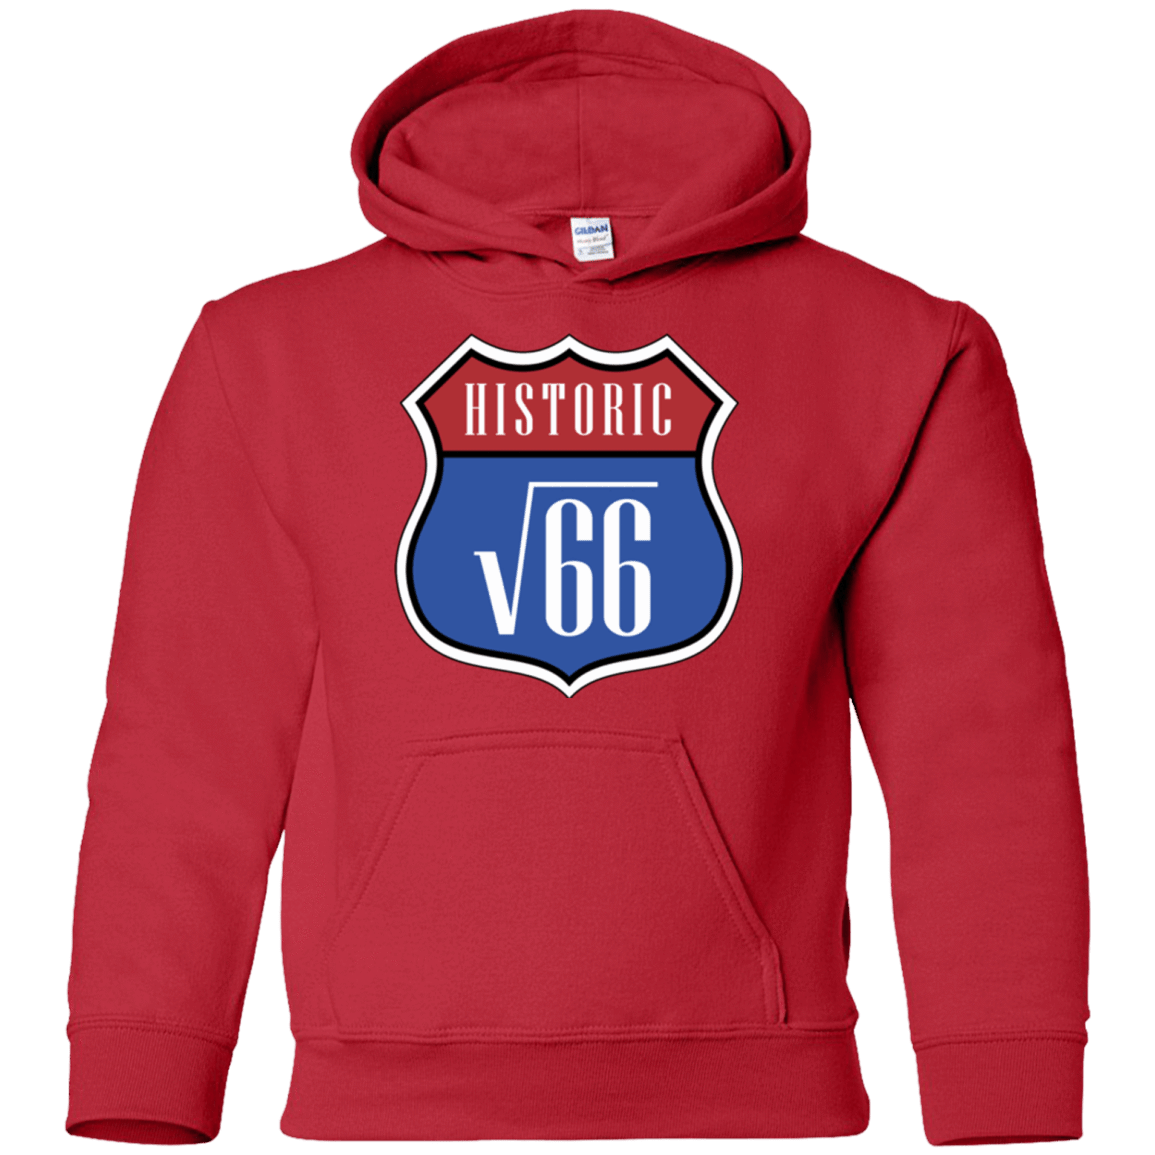 Sweatshirts Red / YS Route v66 Youth Hoodie